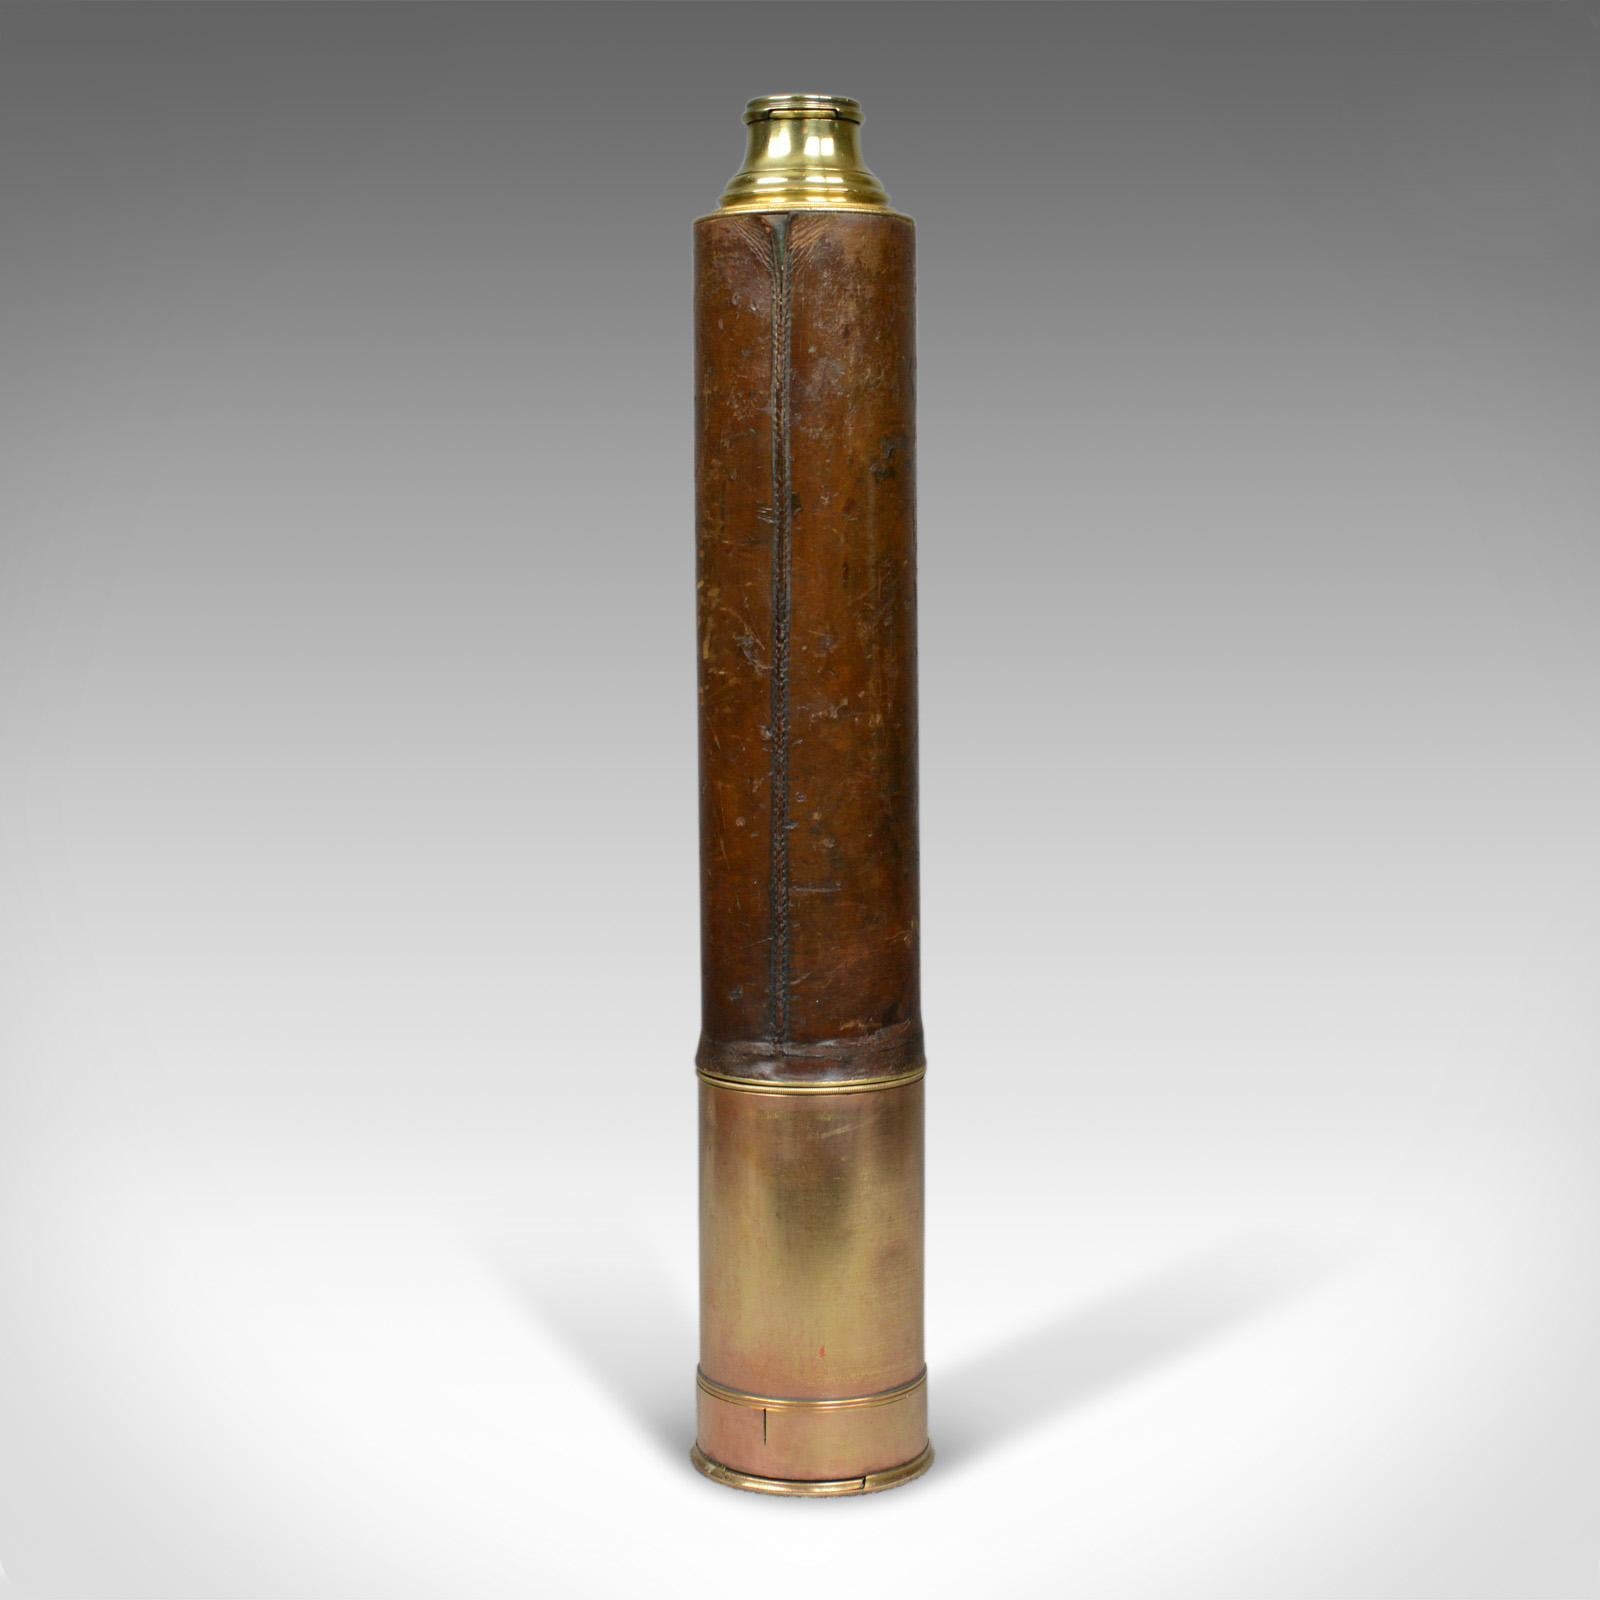 Brass Antique Telescope, Two Draw, Refractor, Stampa and Son, London, circa 1810